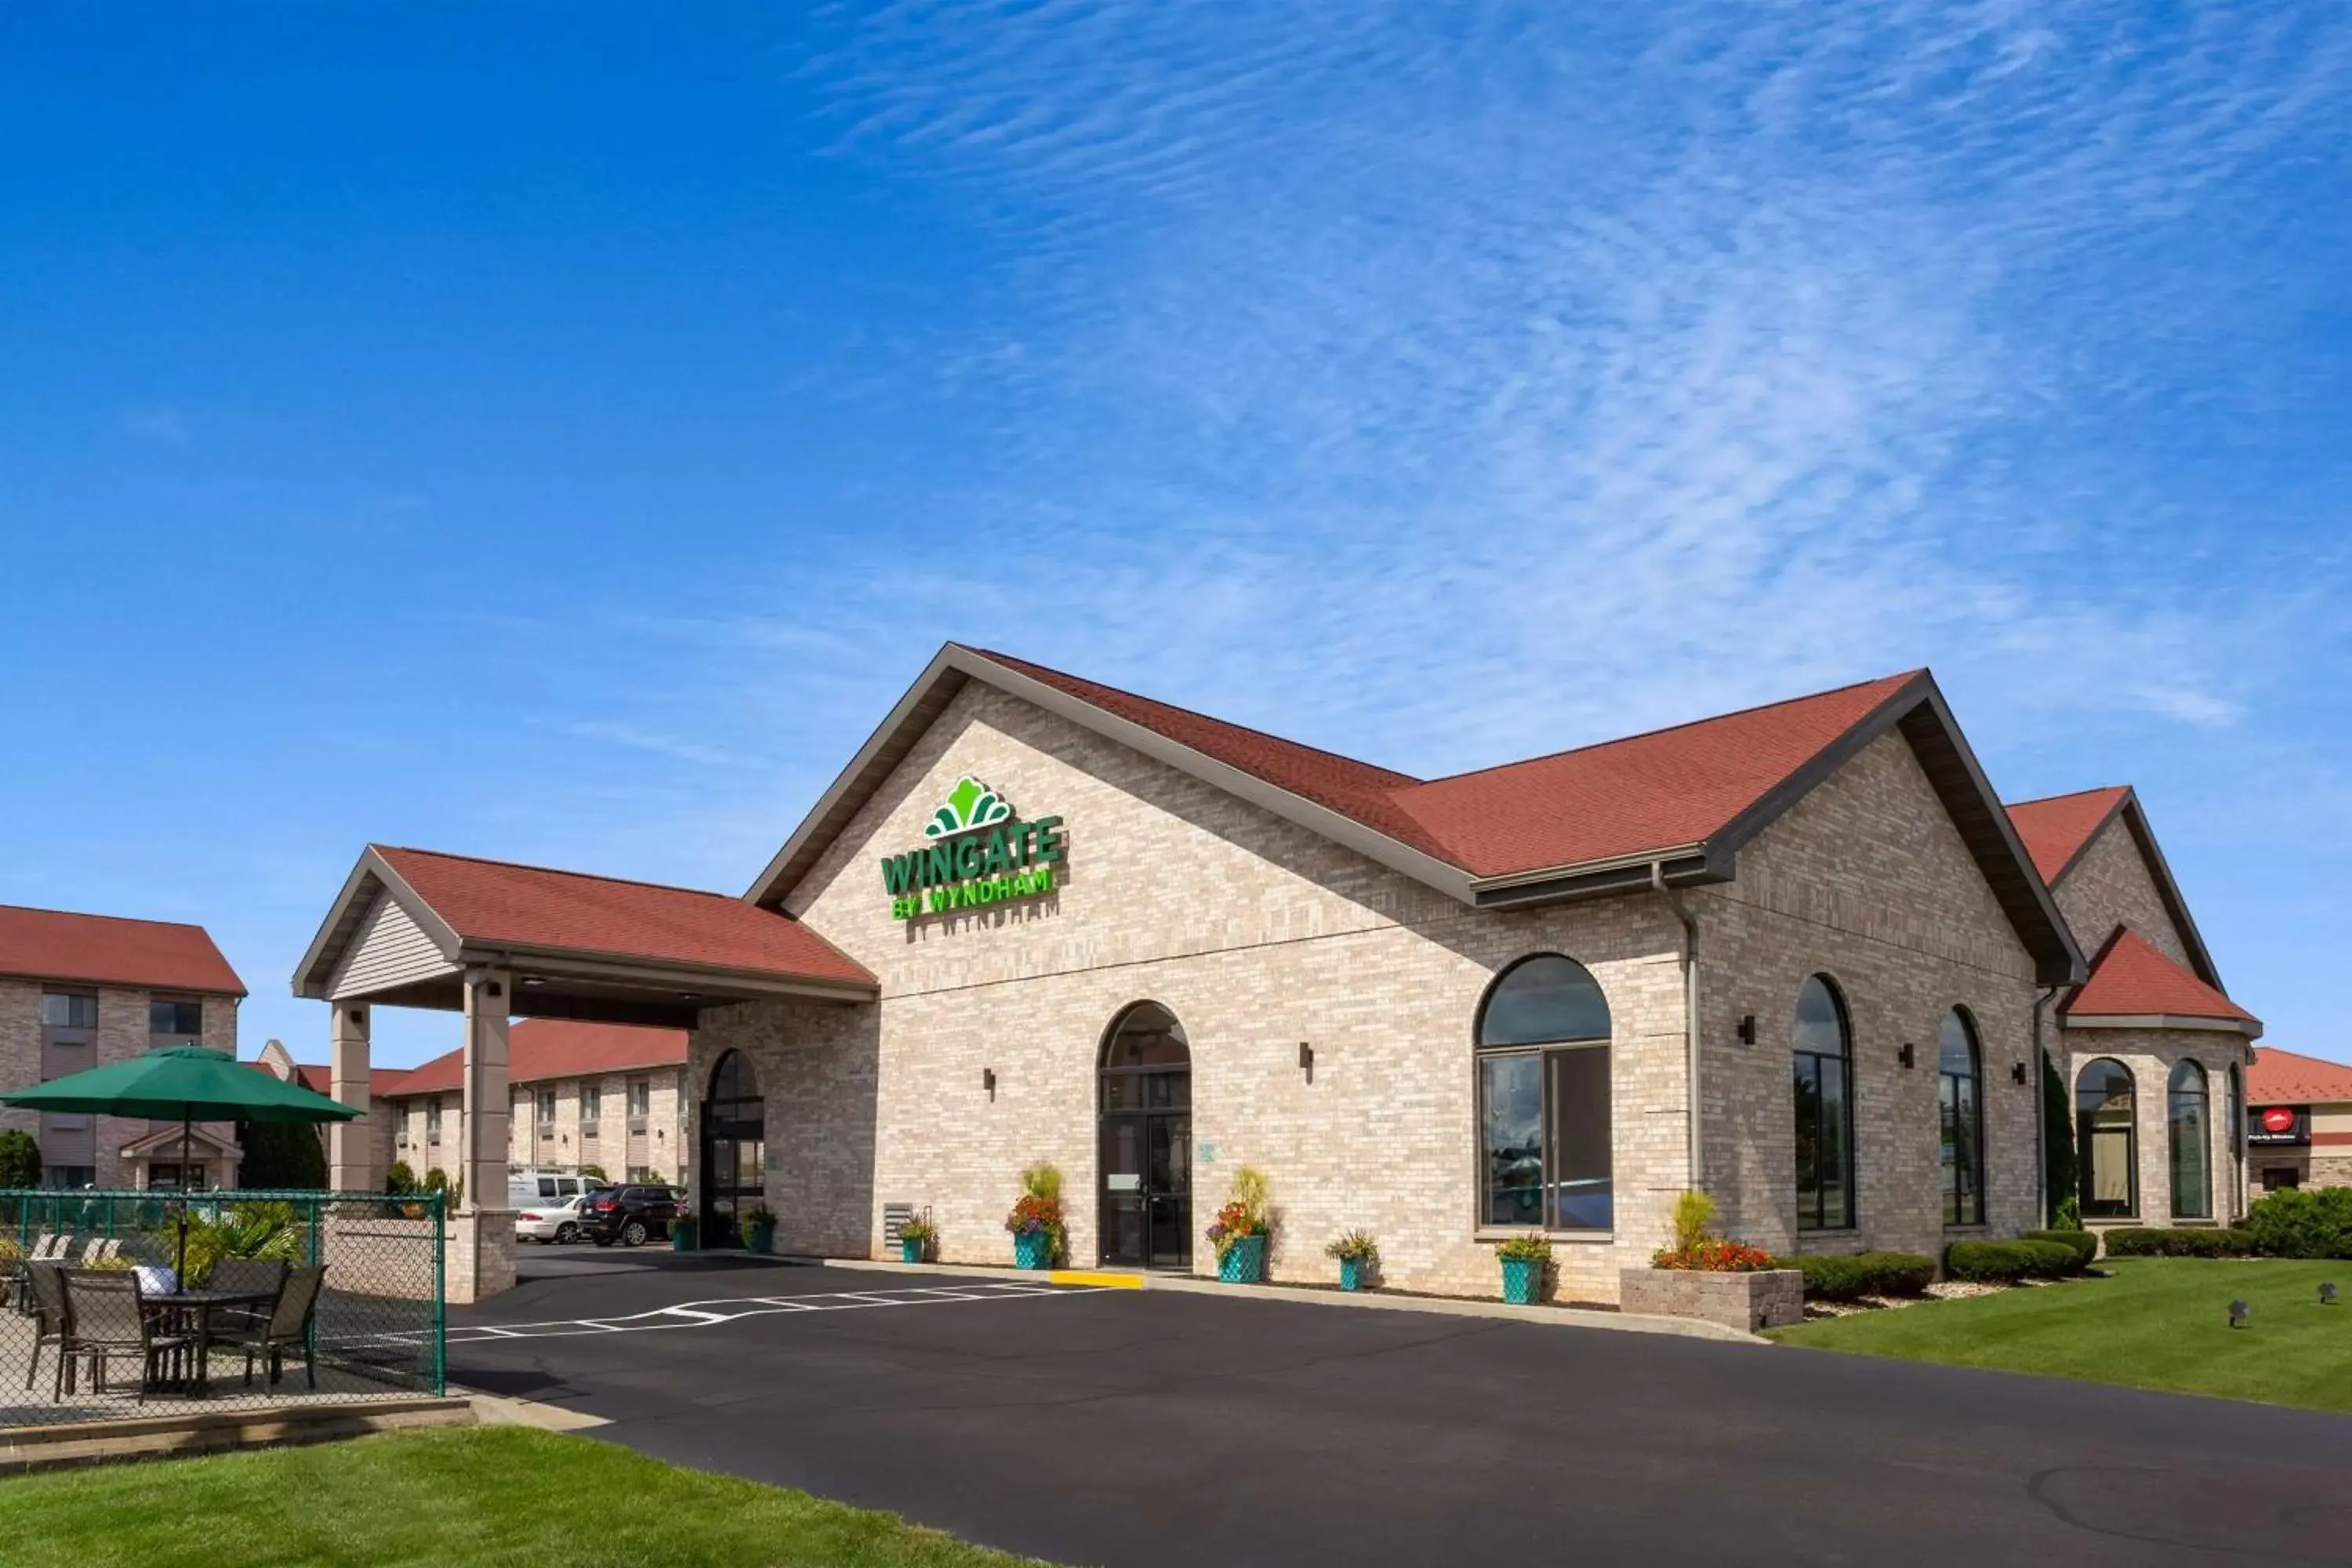 Property Building in Wingate by Wyndham Wisconsin Dells Waterpark